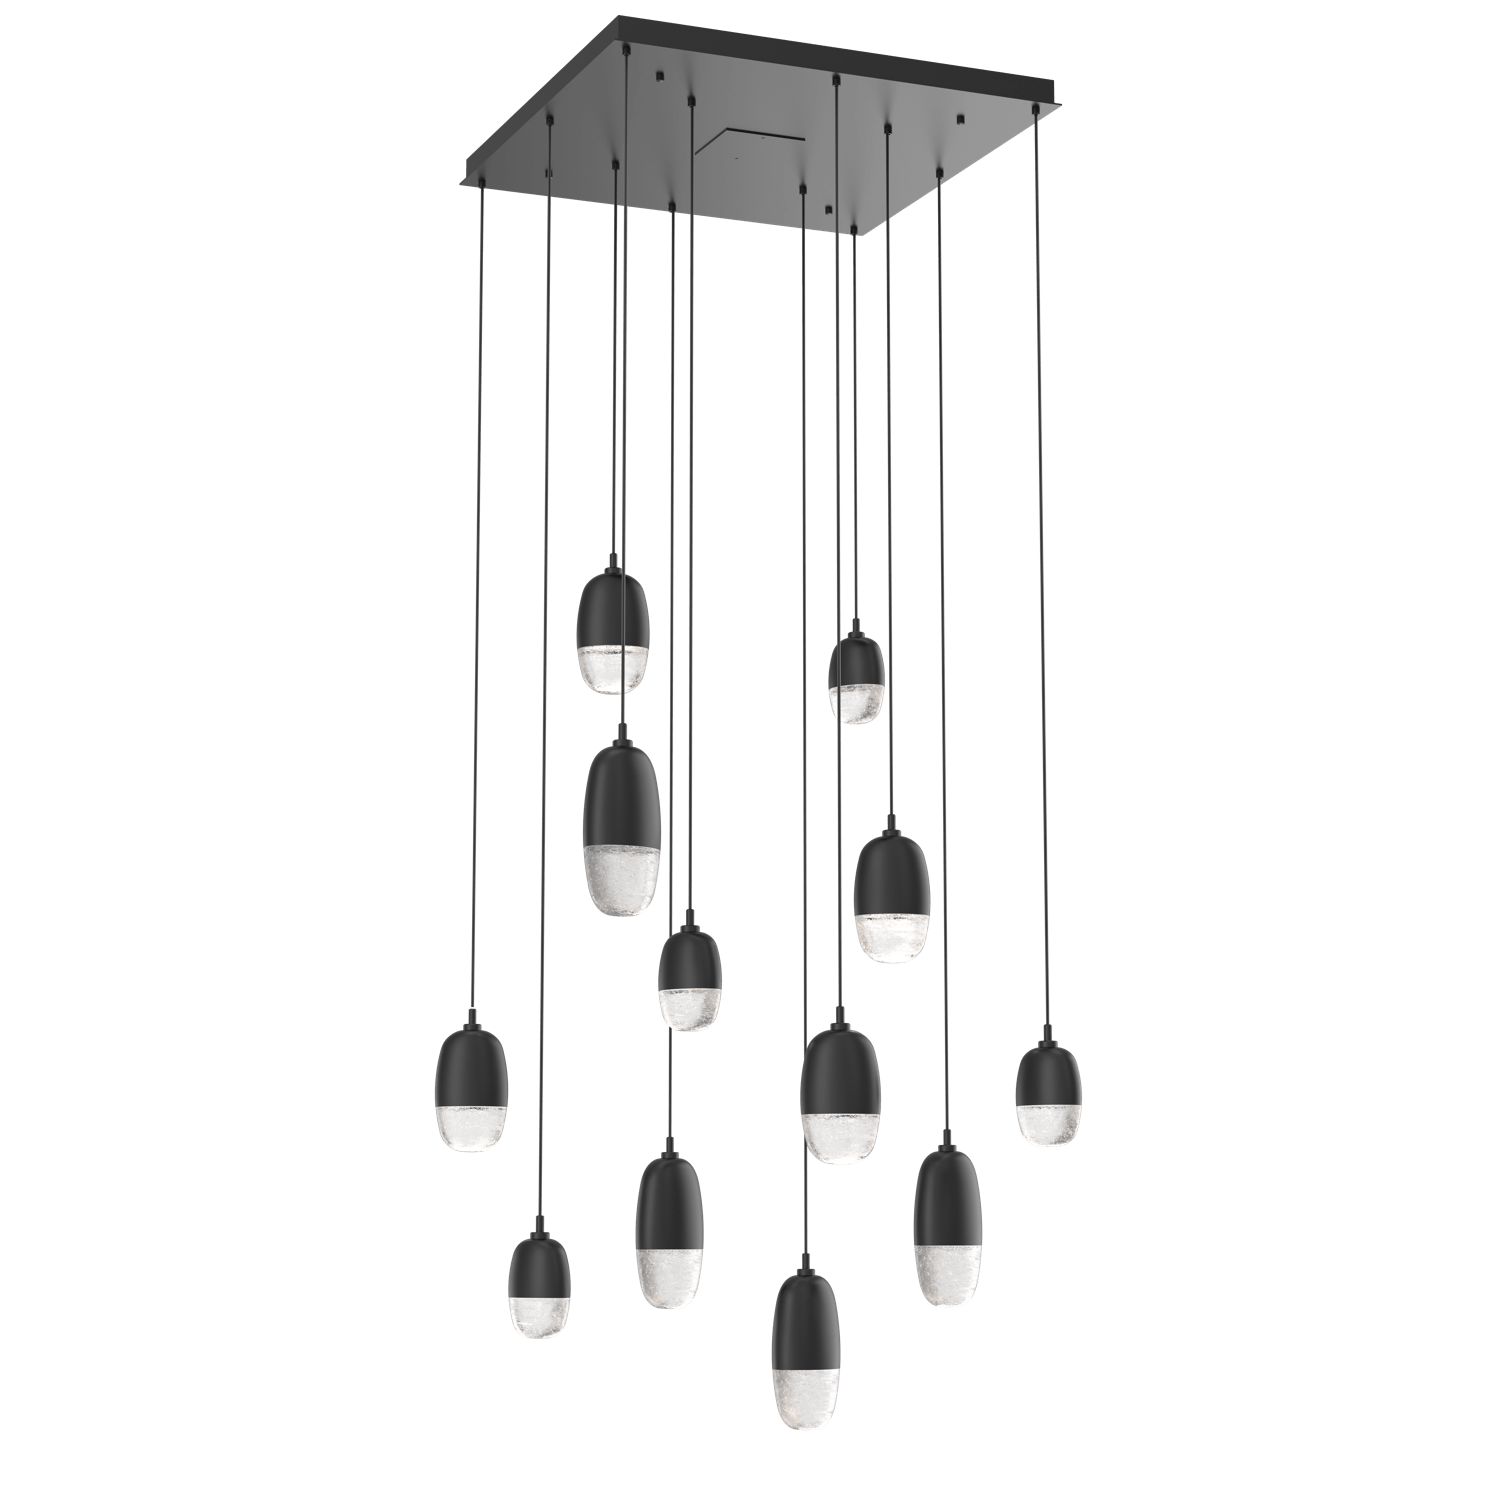 CHB0079-12-MB-Hammerton-Studio-Pebble-12-light-square-pendant-chandelier-with-matte-black-finish-and-clear-cast-glass-shades-and-LED-lamping